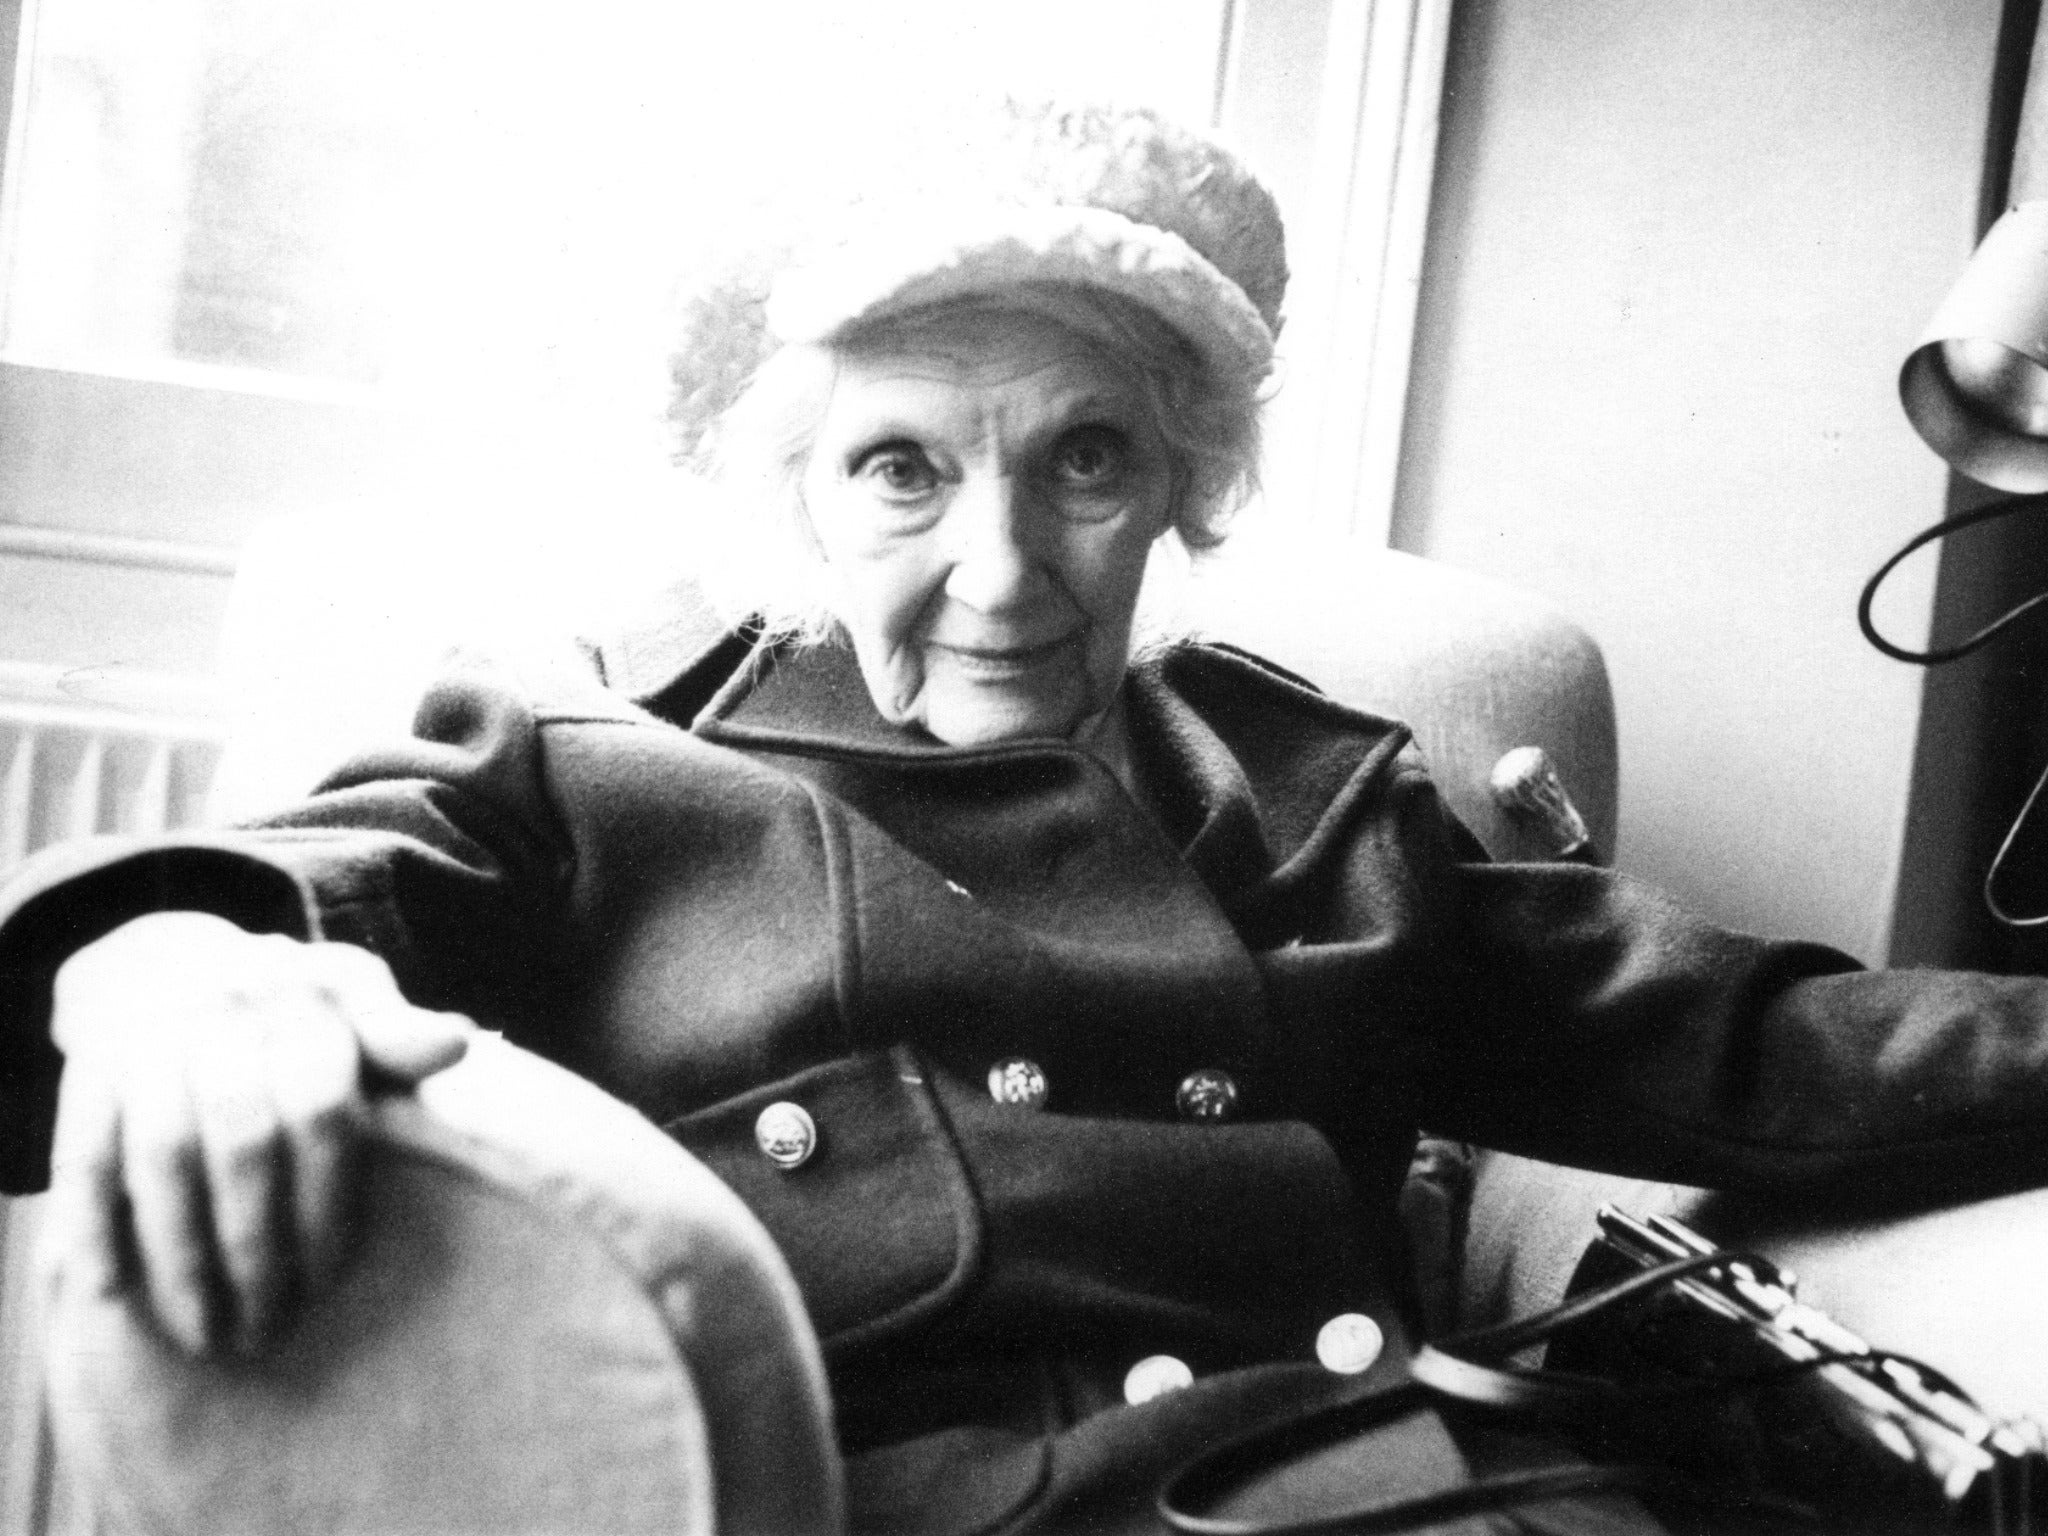 A previously unpublished photo of Jean Rhys; one of the last photographs ever taken of the acclaimed author